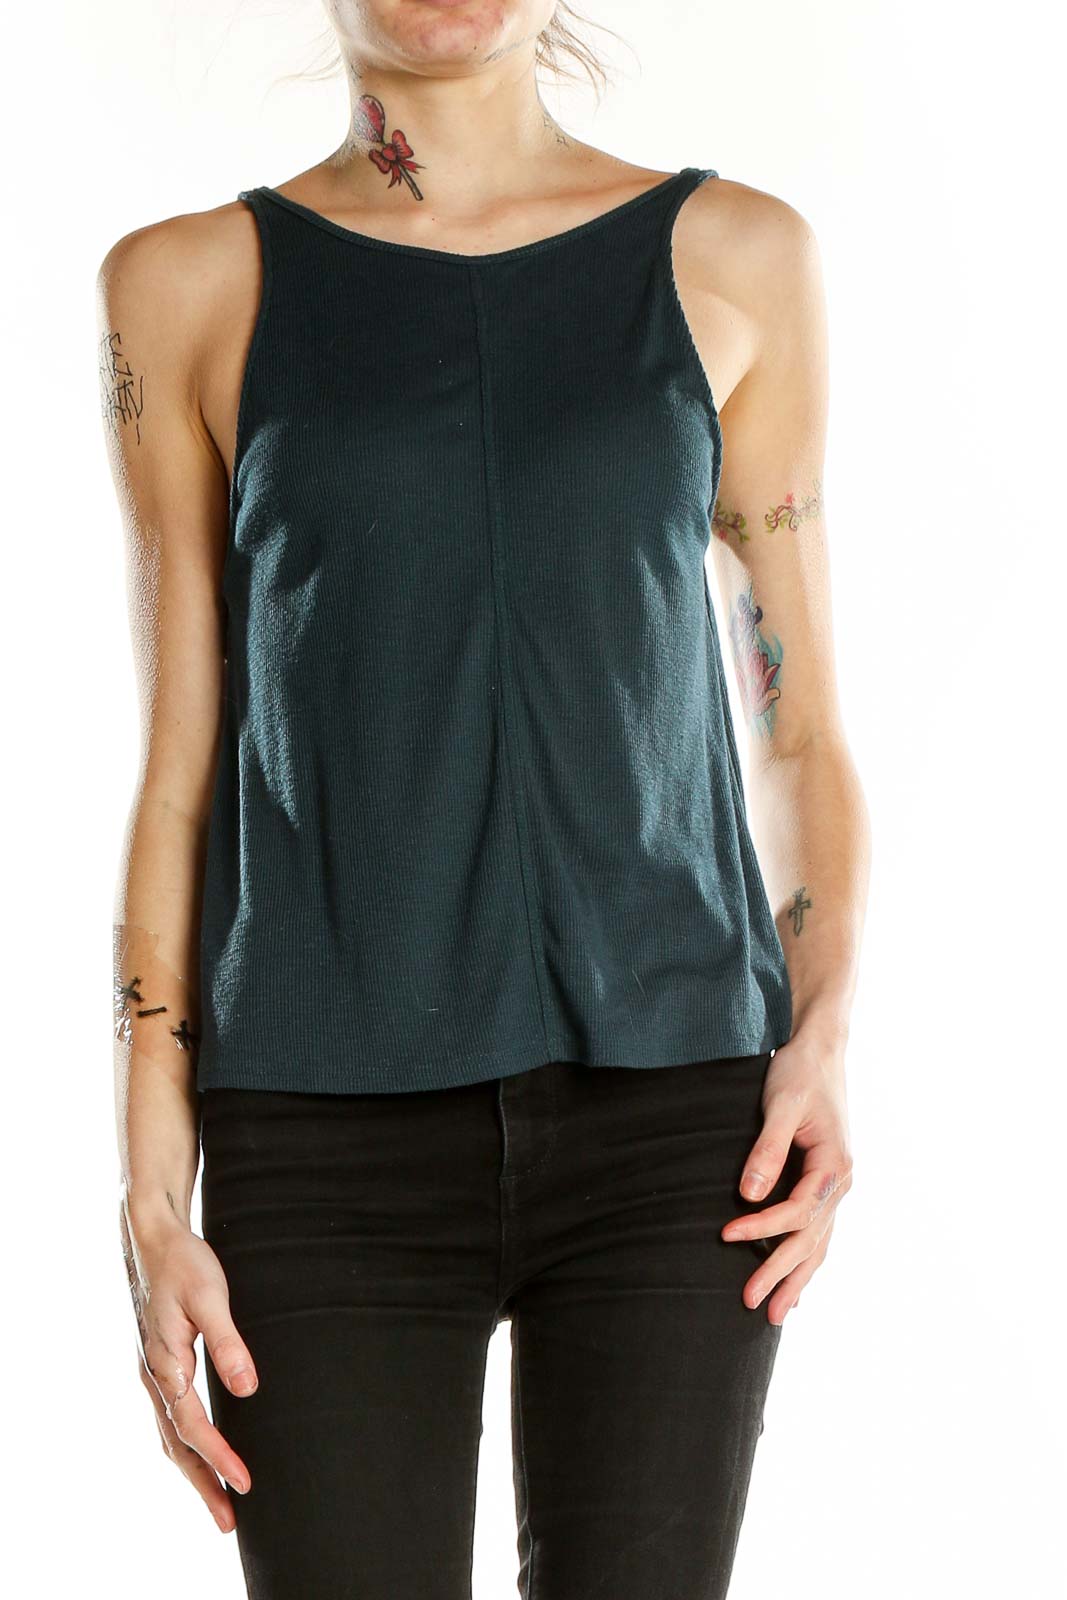 Green Tank Top Front